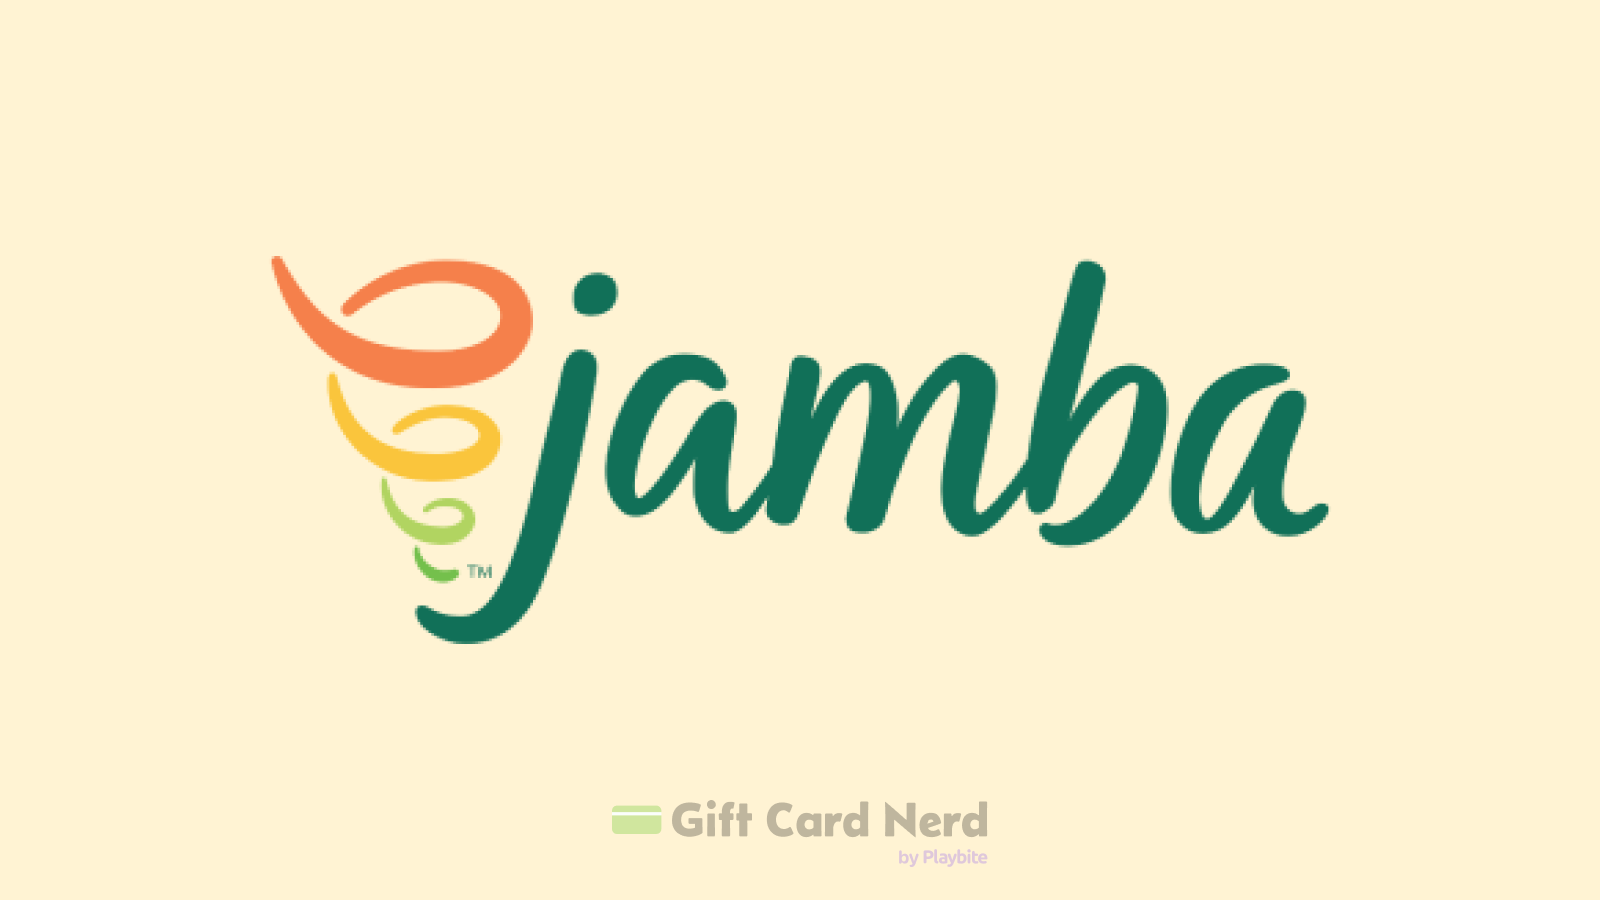 Can You Add a Jamba Juice Gift Card to Apple Wallet?